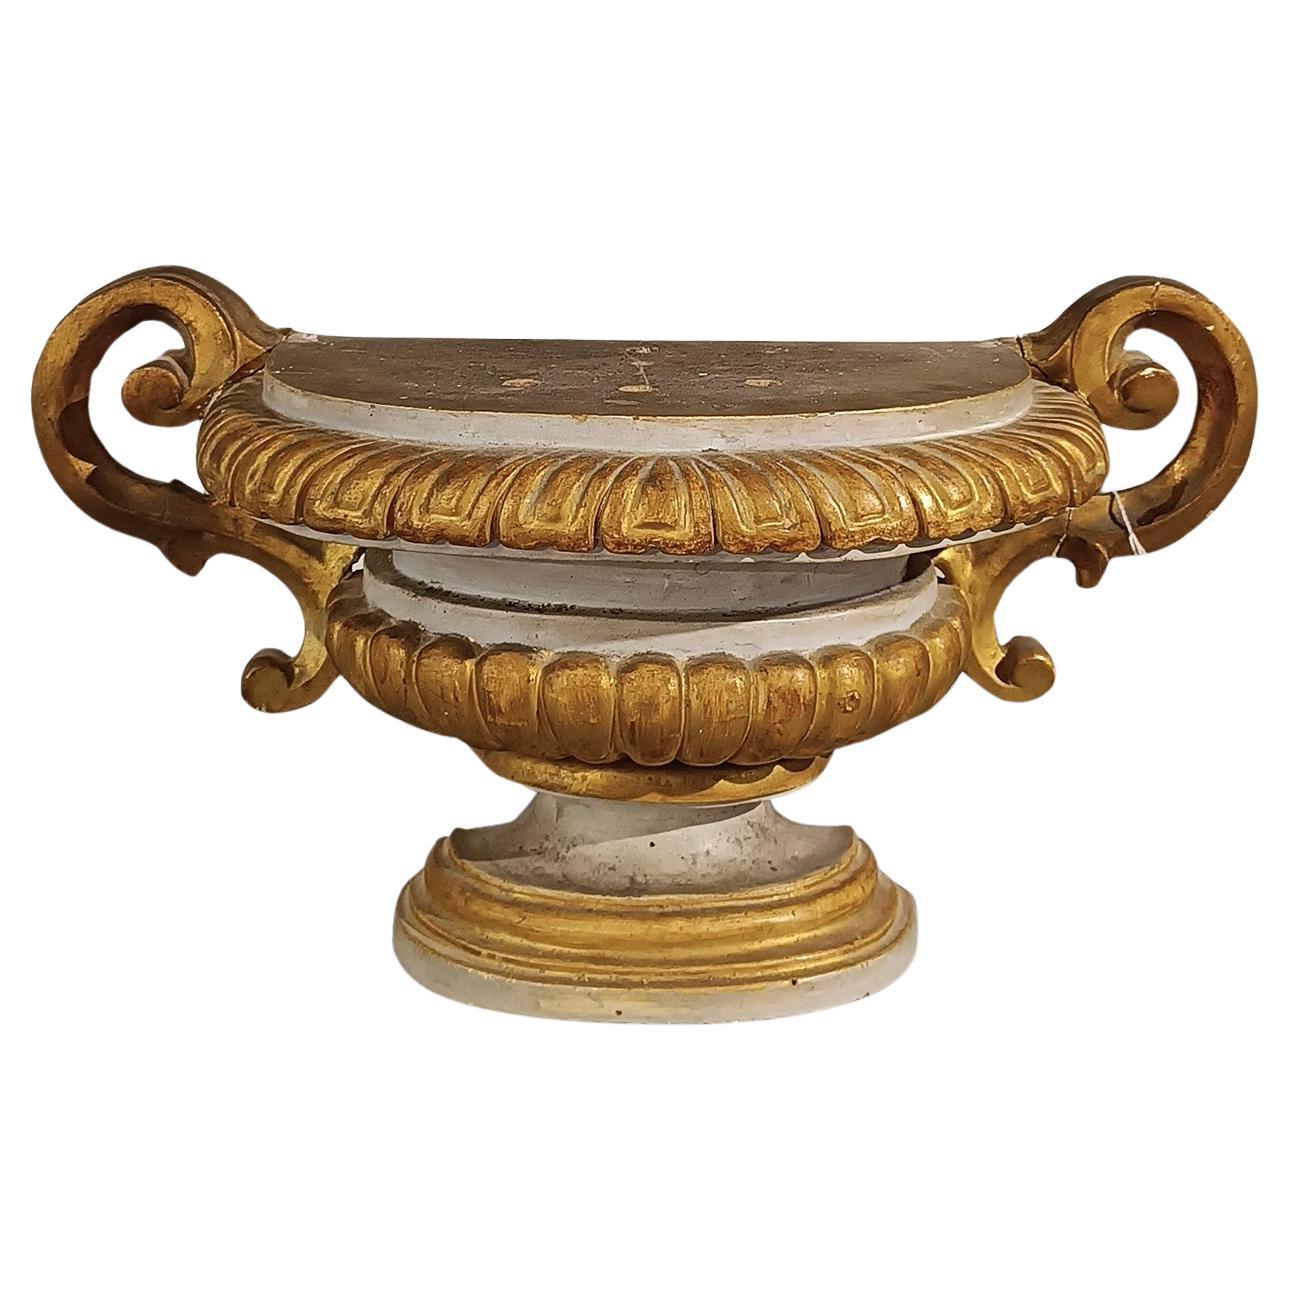 END OF THE 18th CENTURY NEOCLASSIC PALM HOLDER VASE For Sale